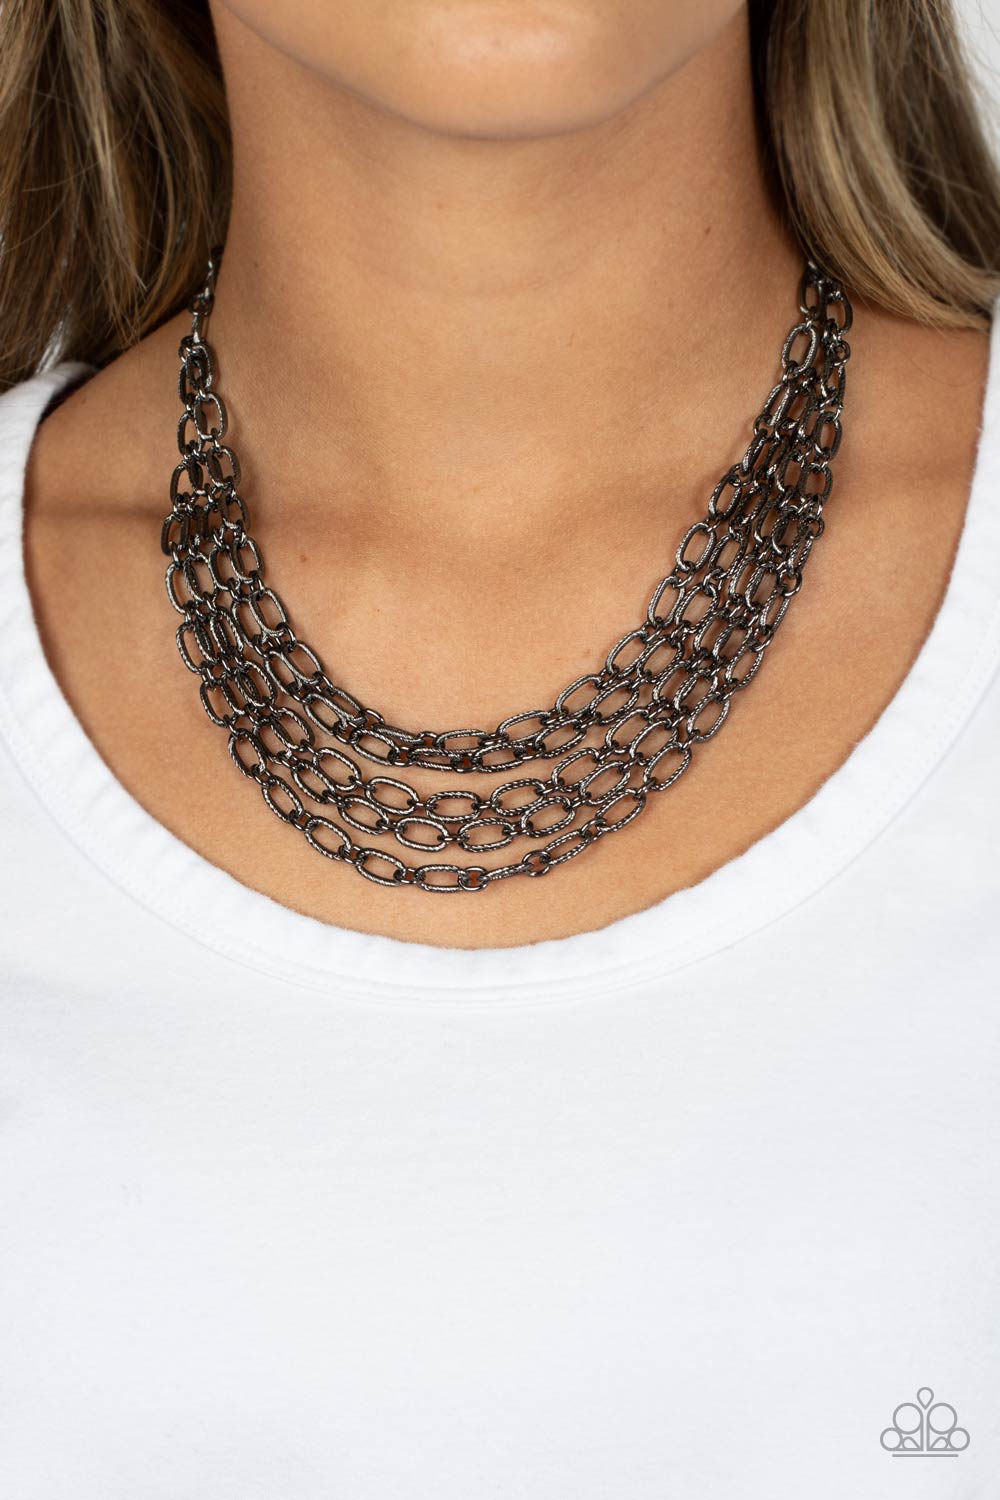 House of CHAIN Gunmetal Black Necklace - Paparazzi Accessories-on model - CarasShop.com - $5 Jewelry by Cara Jewels